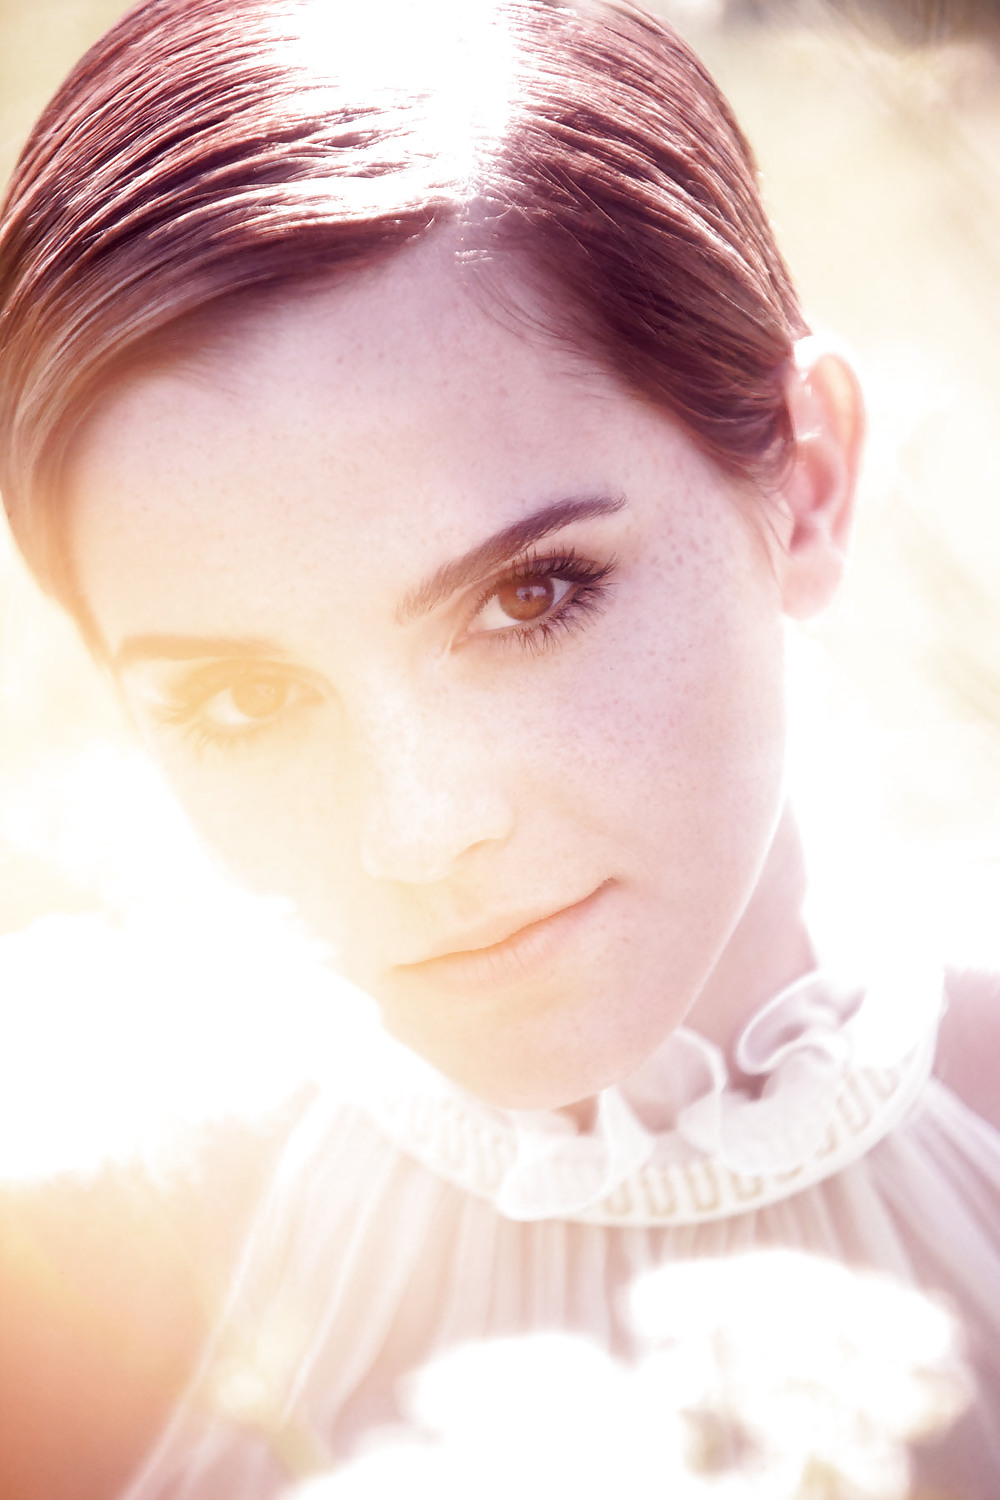 Most beautiful emma watson pic and face ever! #17724422